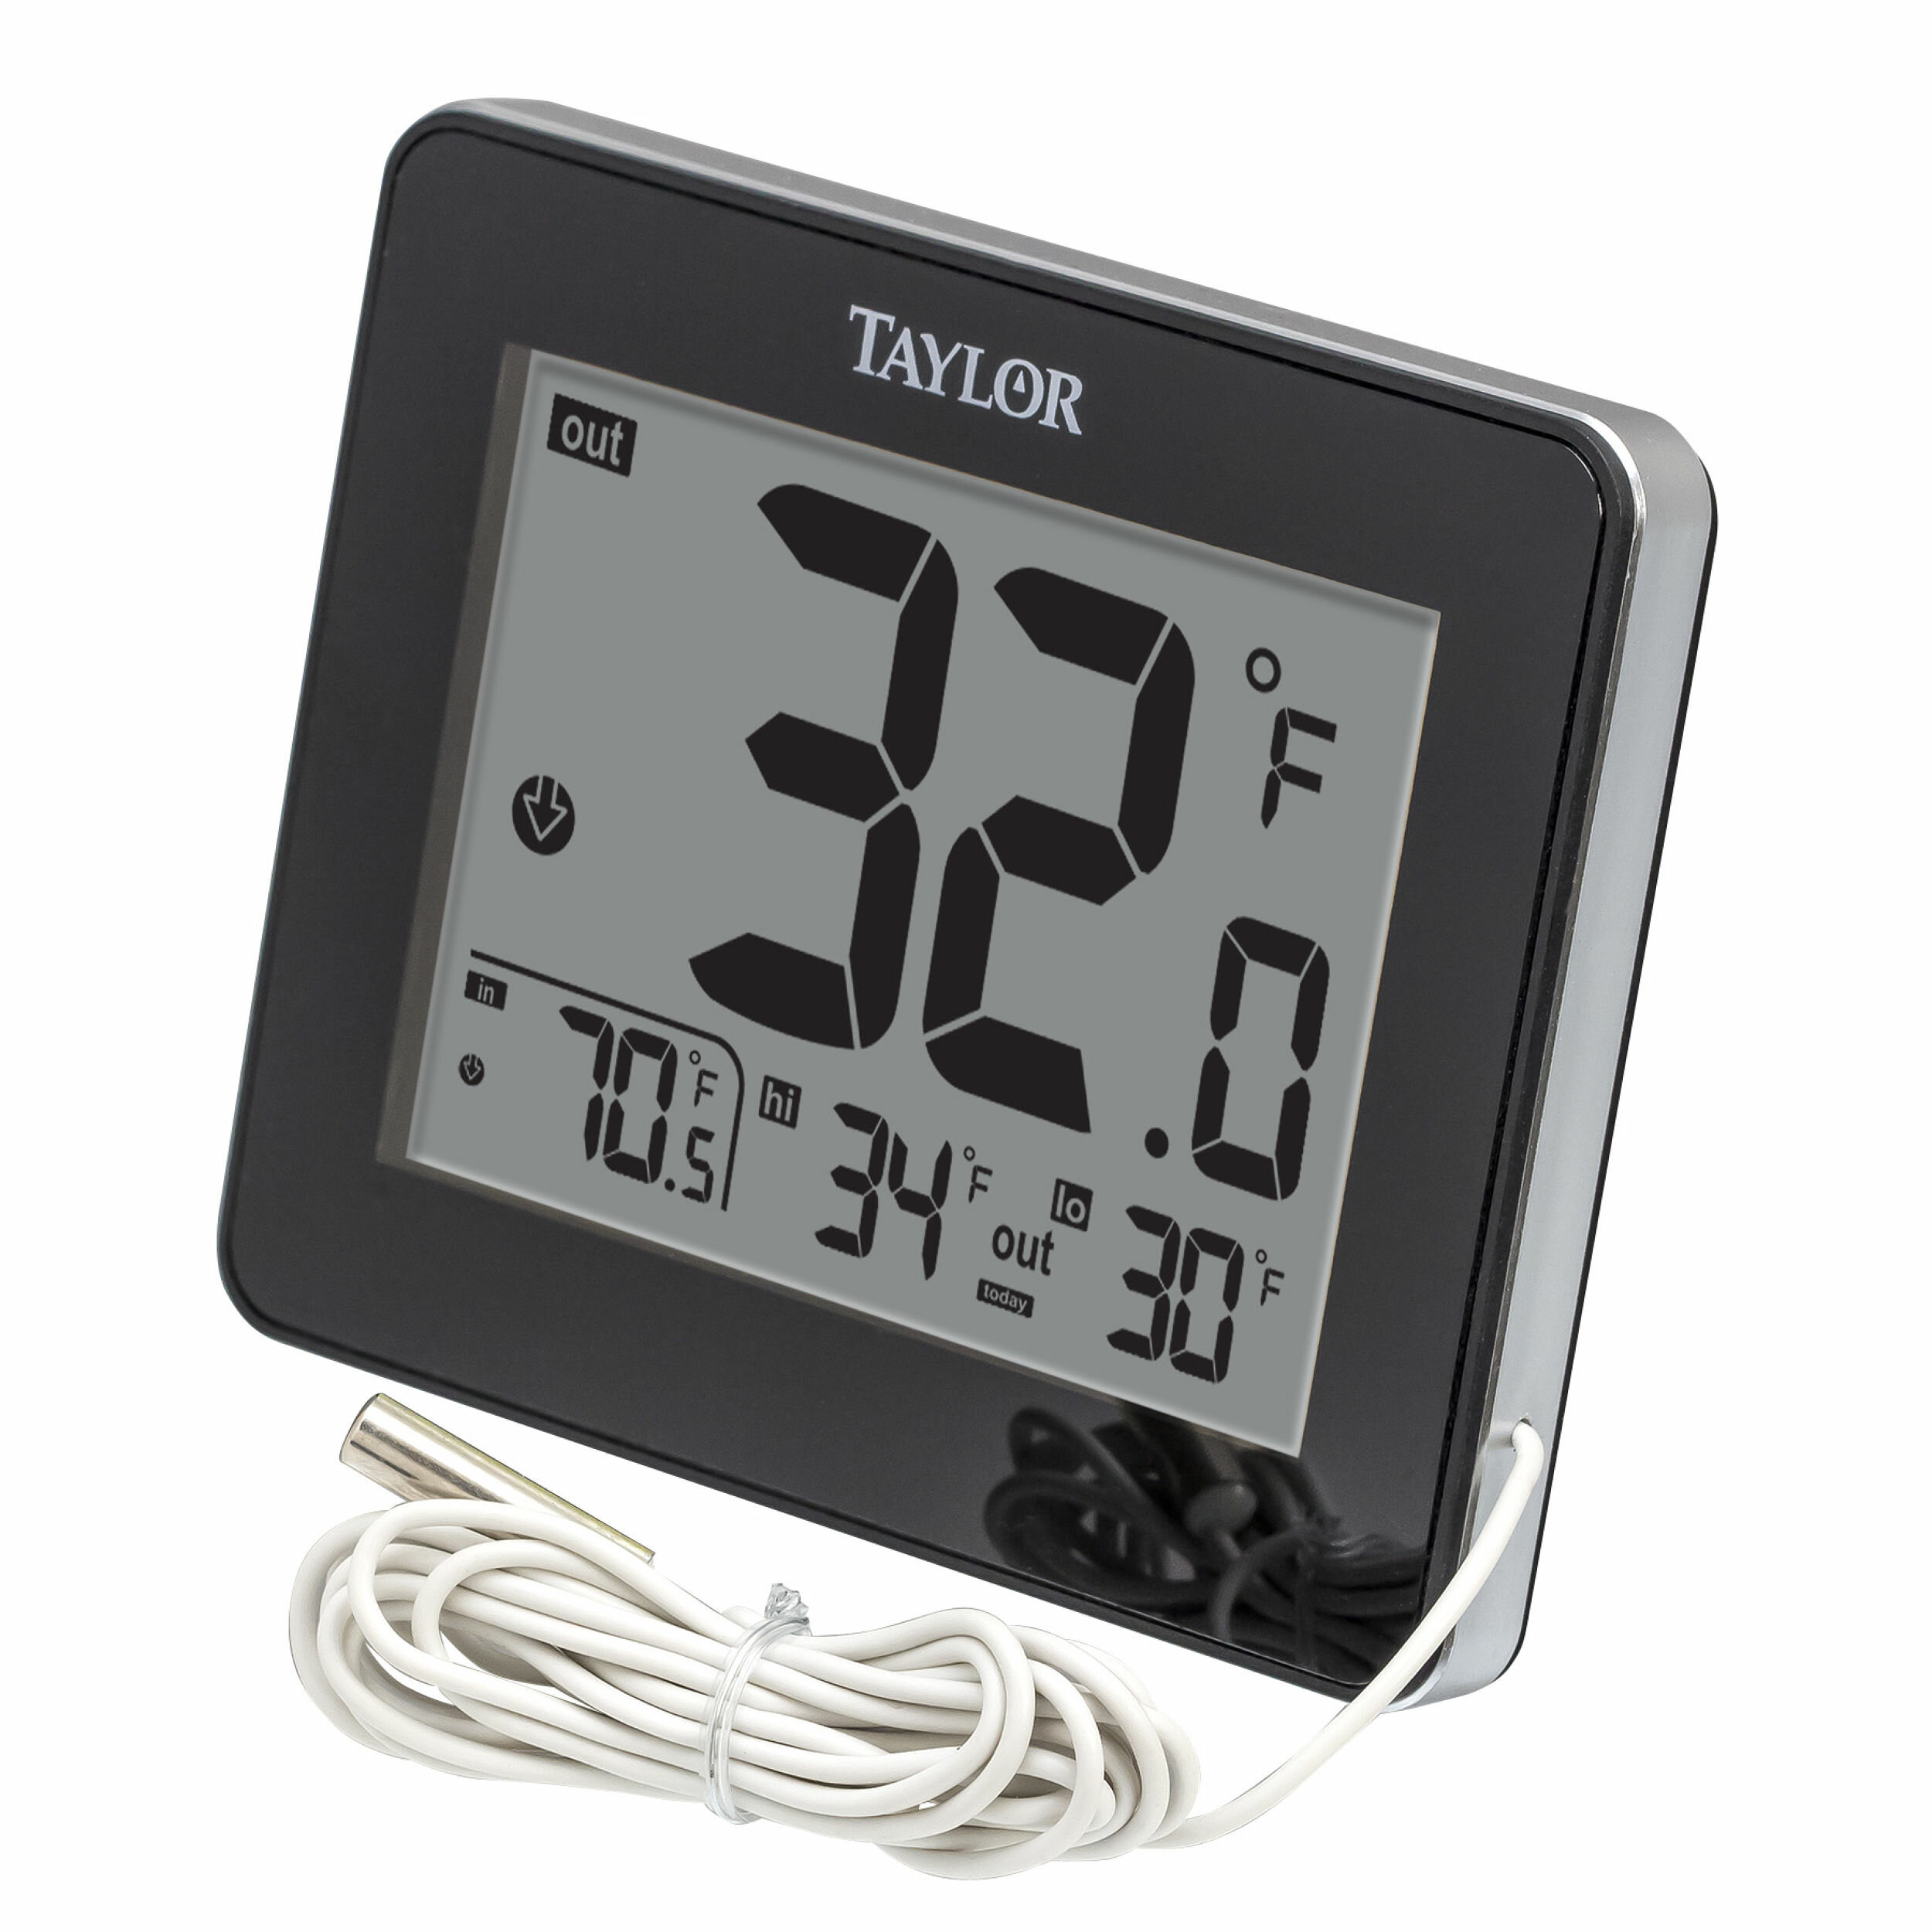 Digital Thermometer with Outdoor Temperature